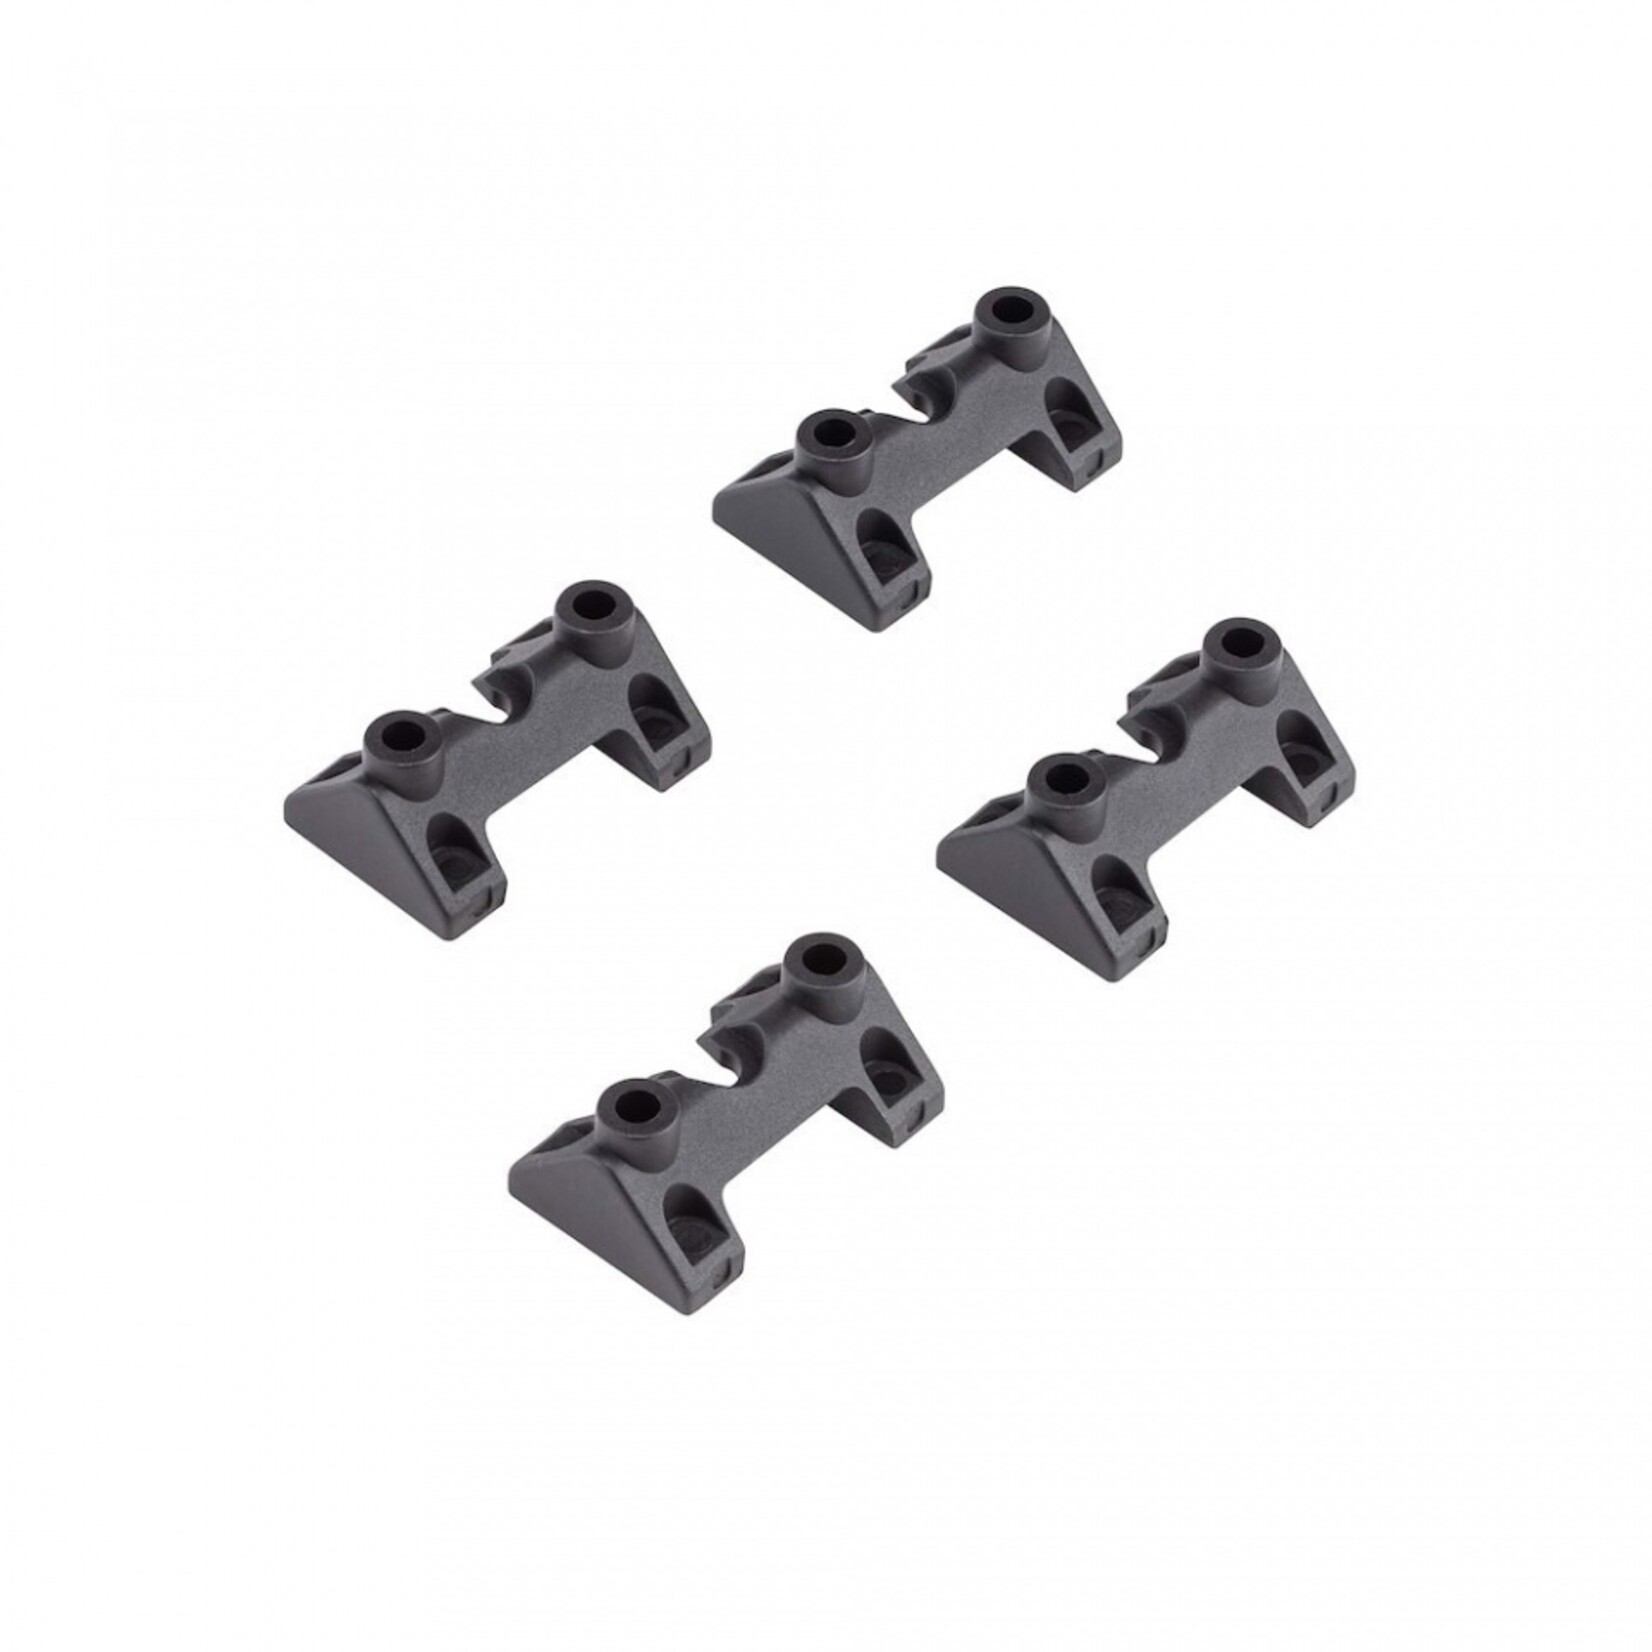 Manfrotto Set of 4 Wedges for Super Clamp